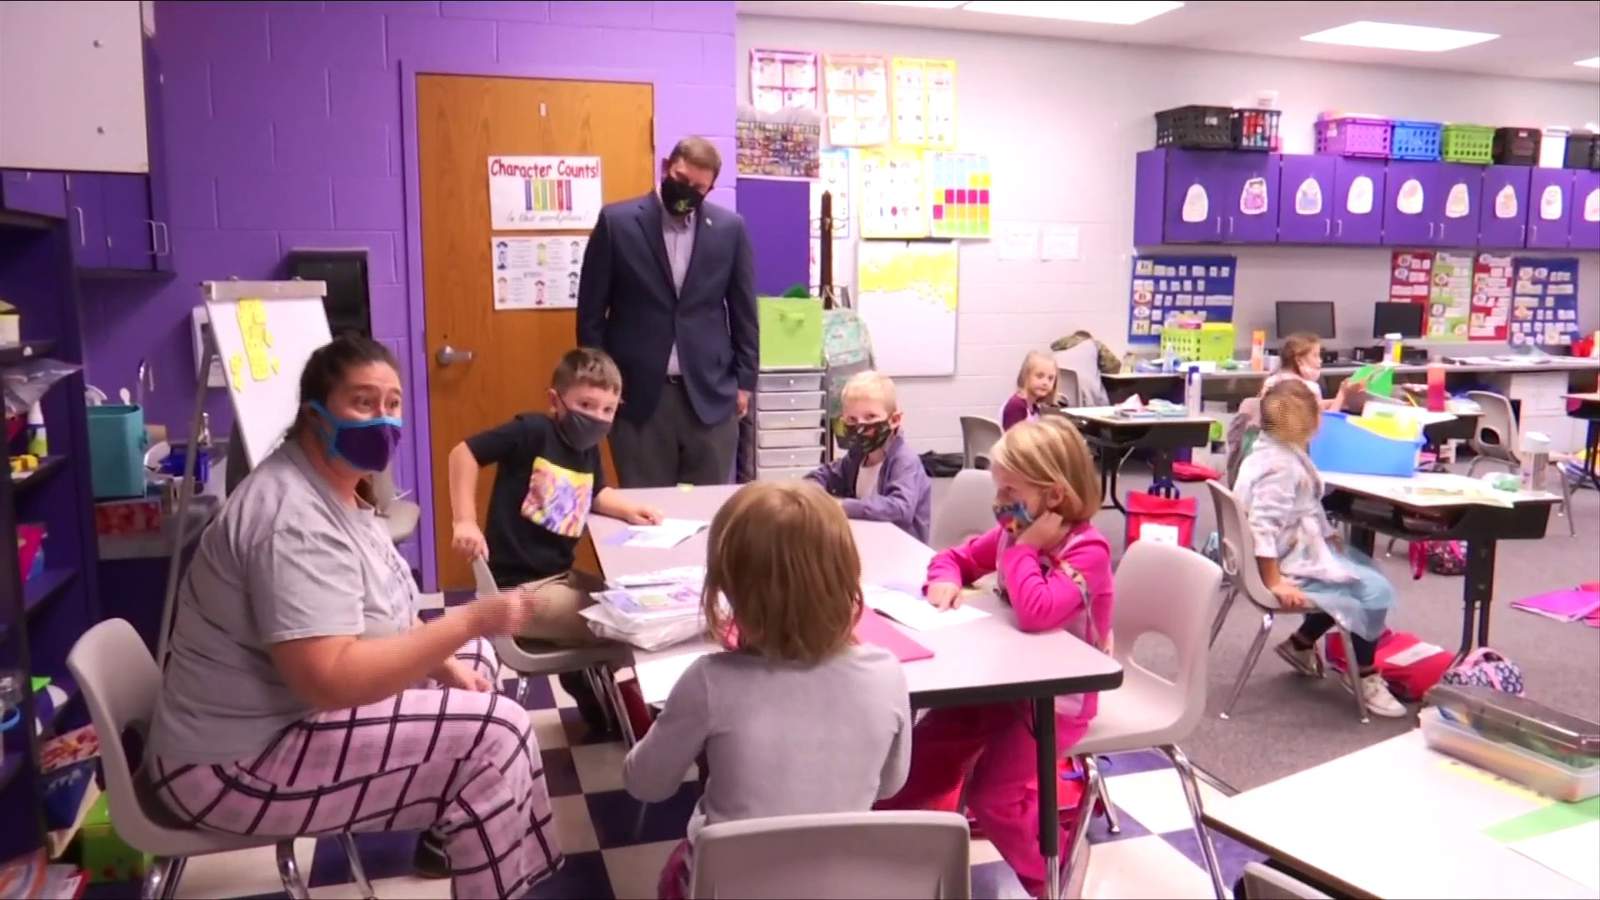 State Superintendent of Education tours Botetourt County schools